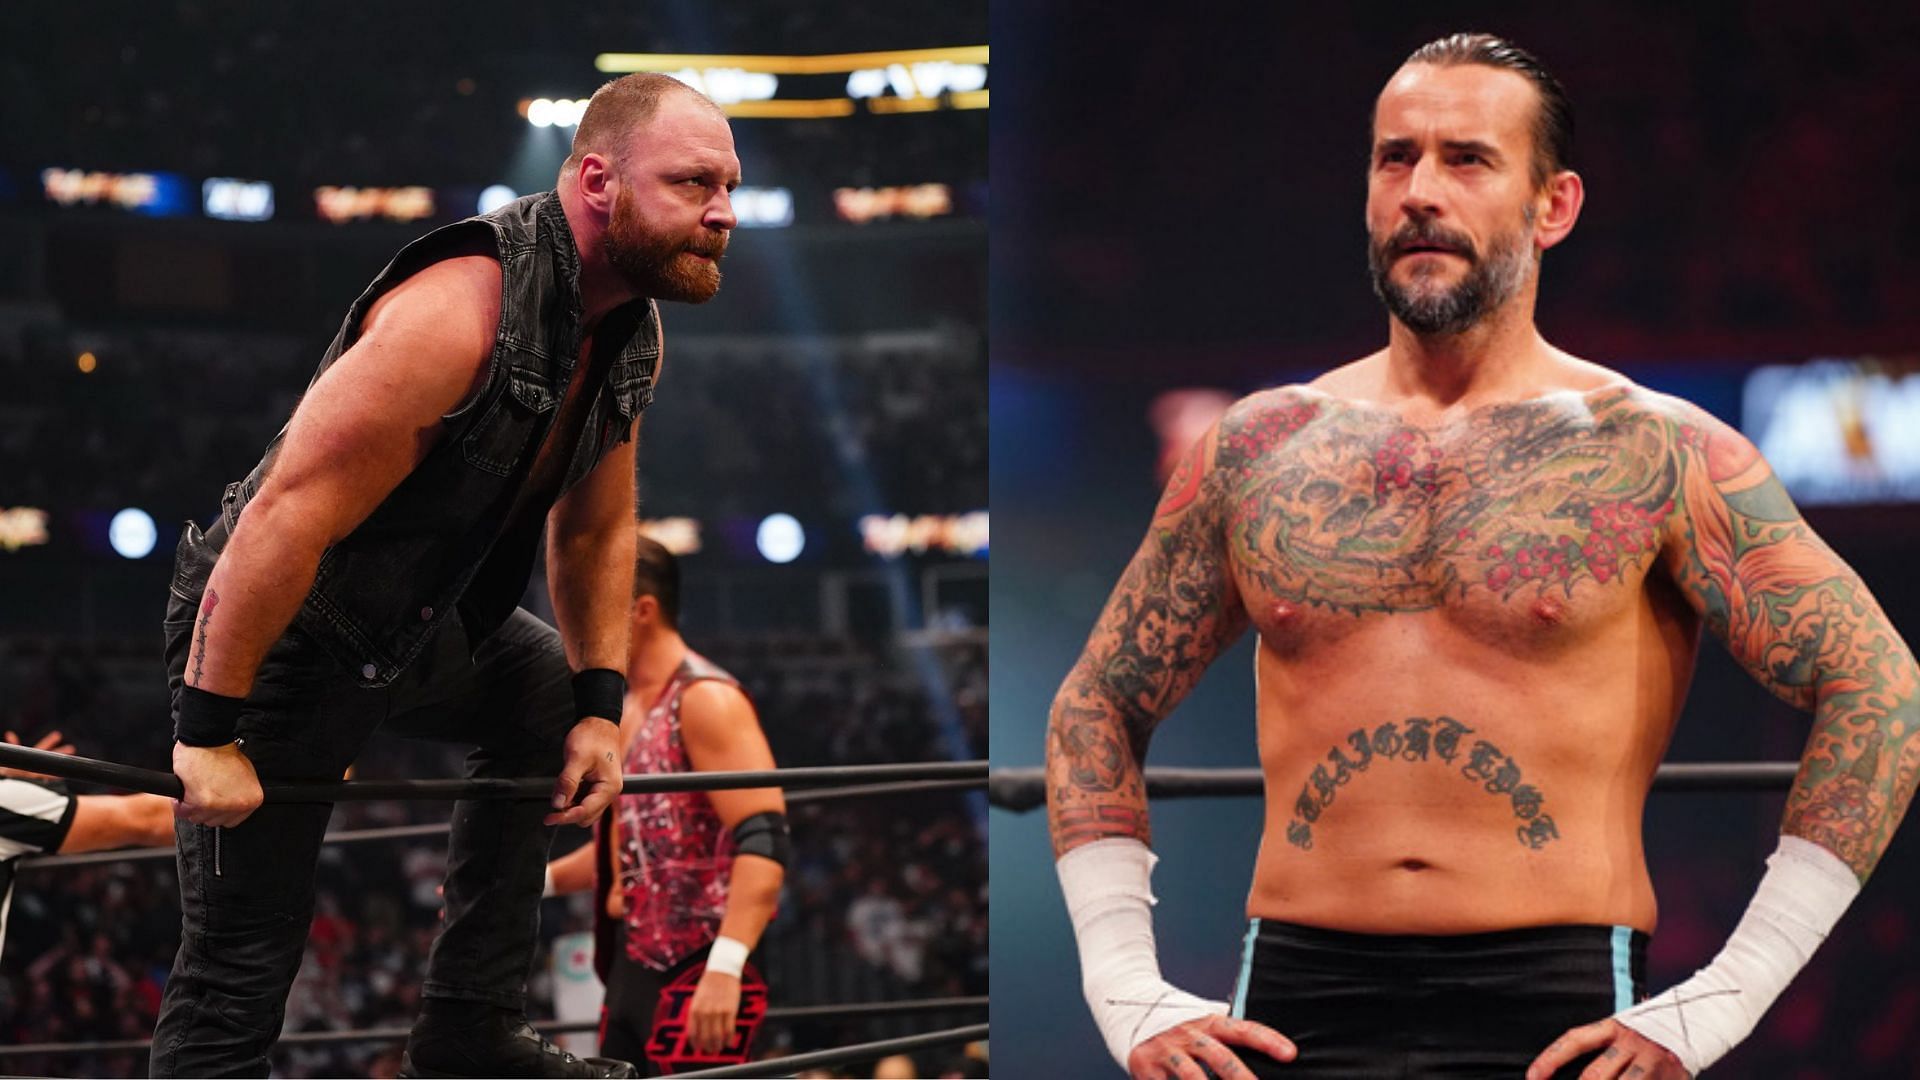 AEW star Jon Moxley (left) could face CM Punk (right) on his return.